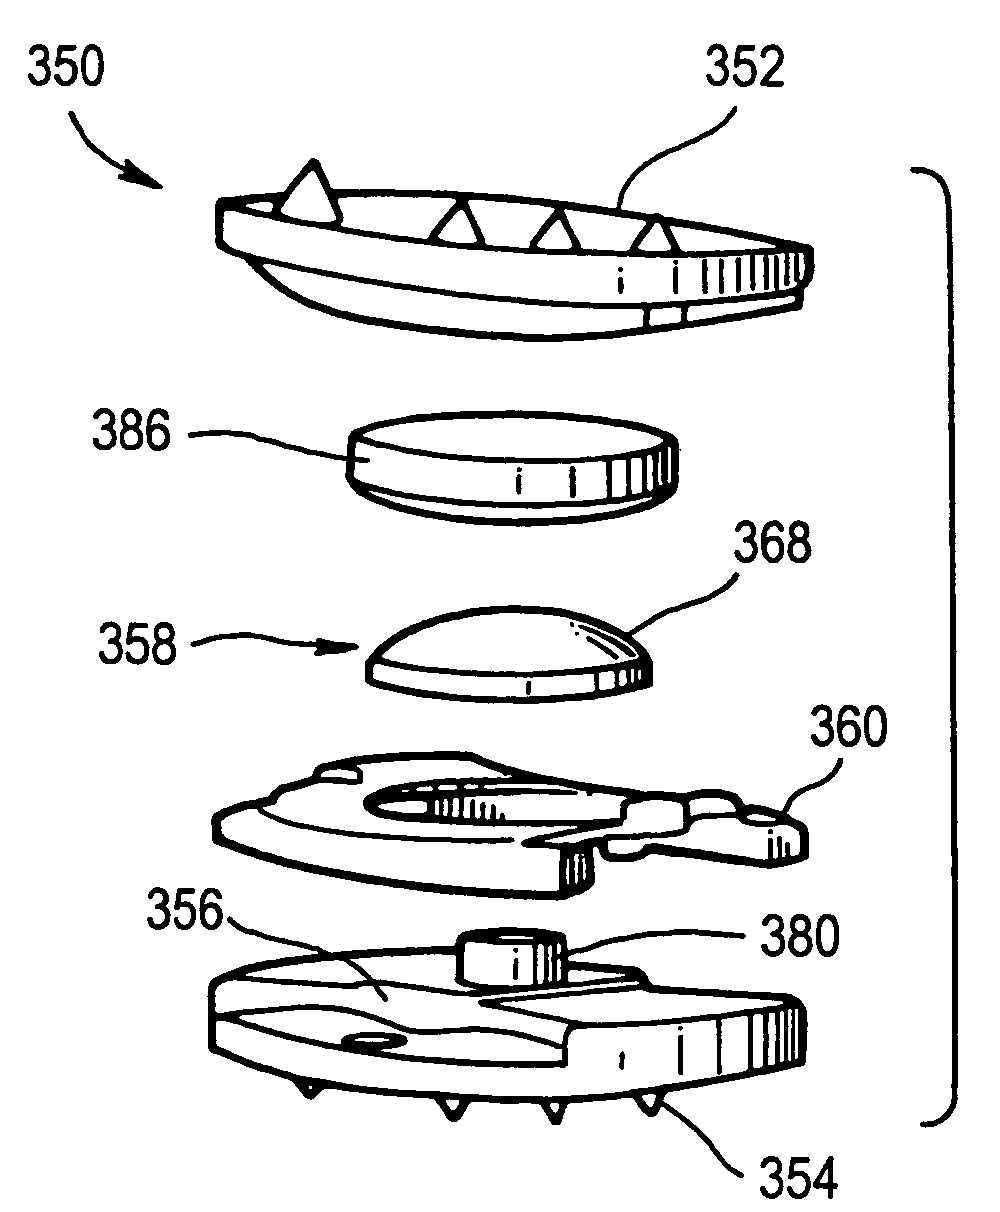 Controlled artificial intervertebral disc implant